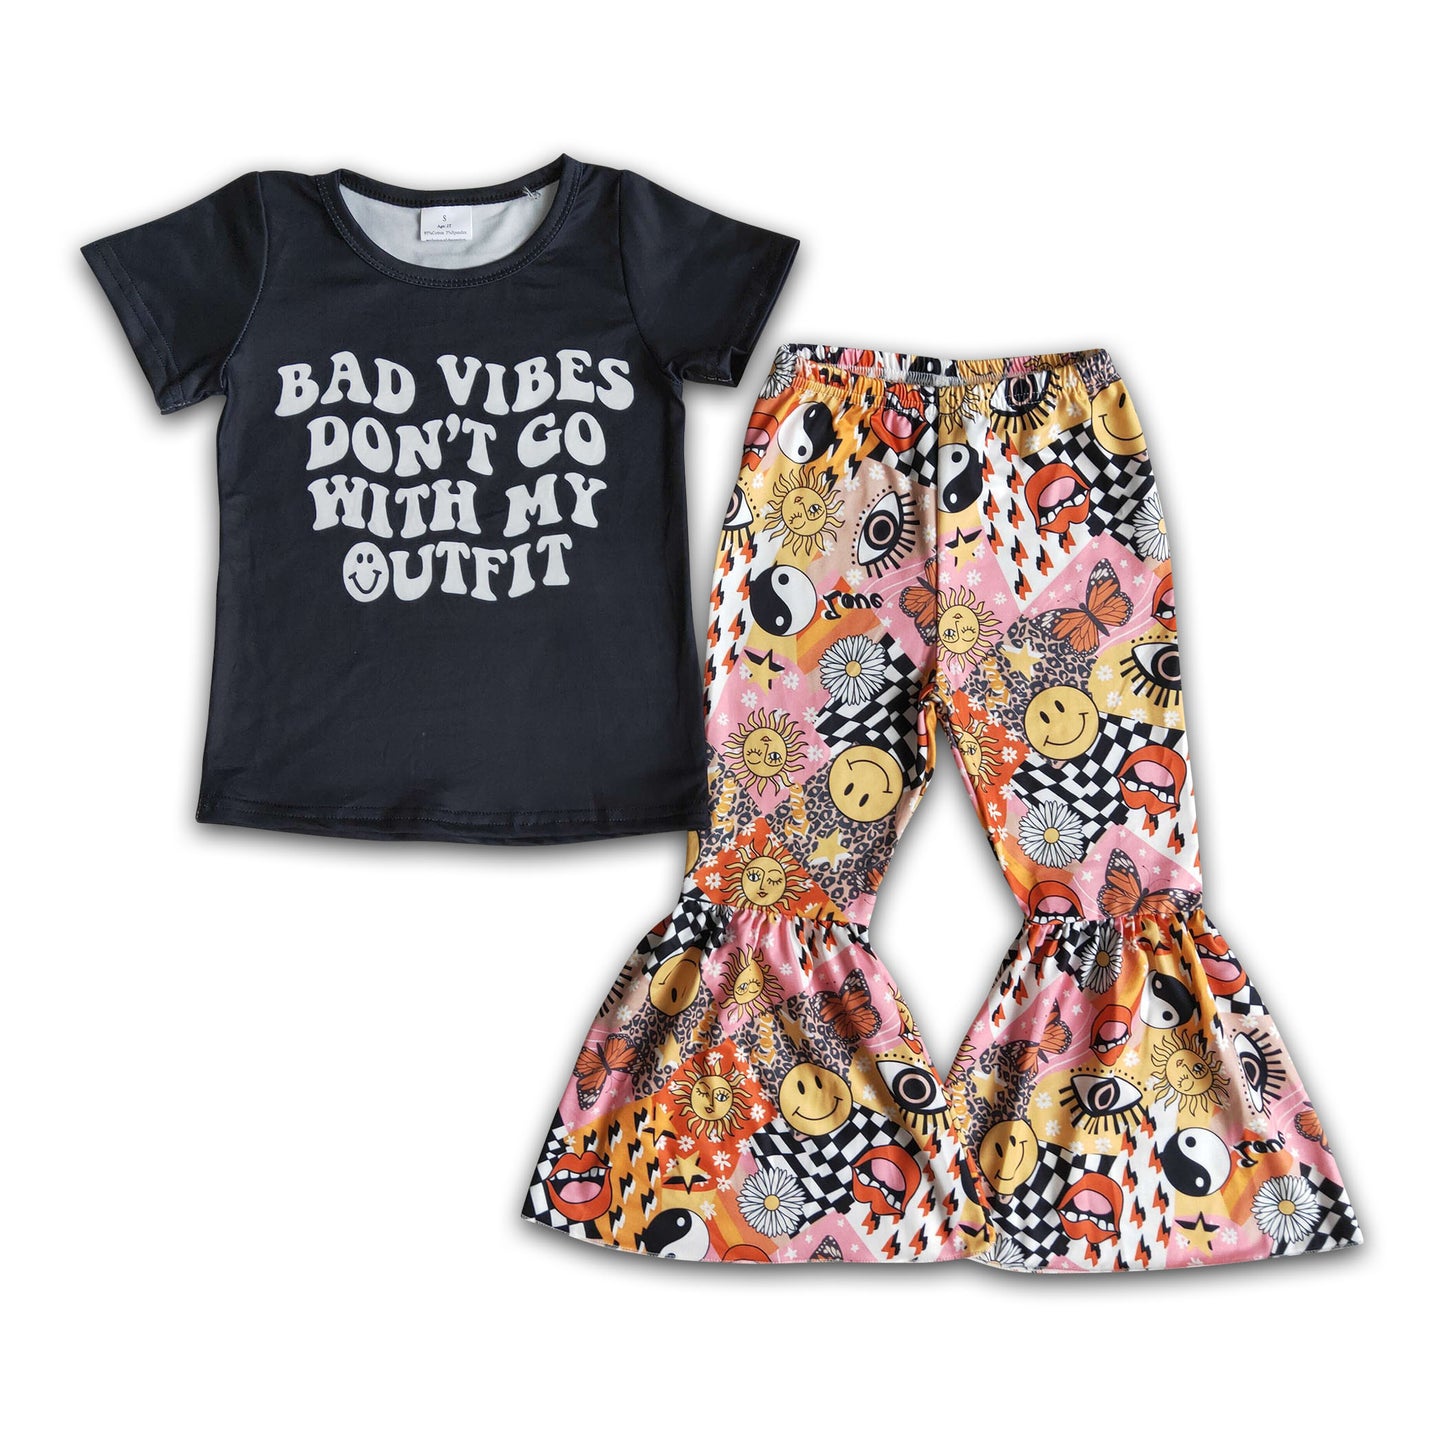 Bad vibes don't go with my outfit sun pants girls clothing set